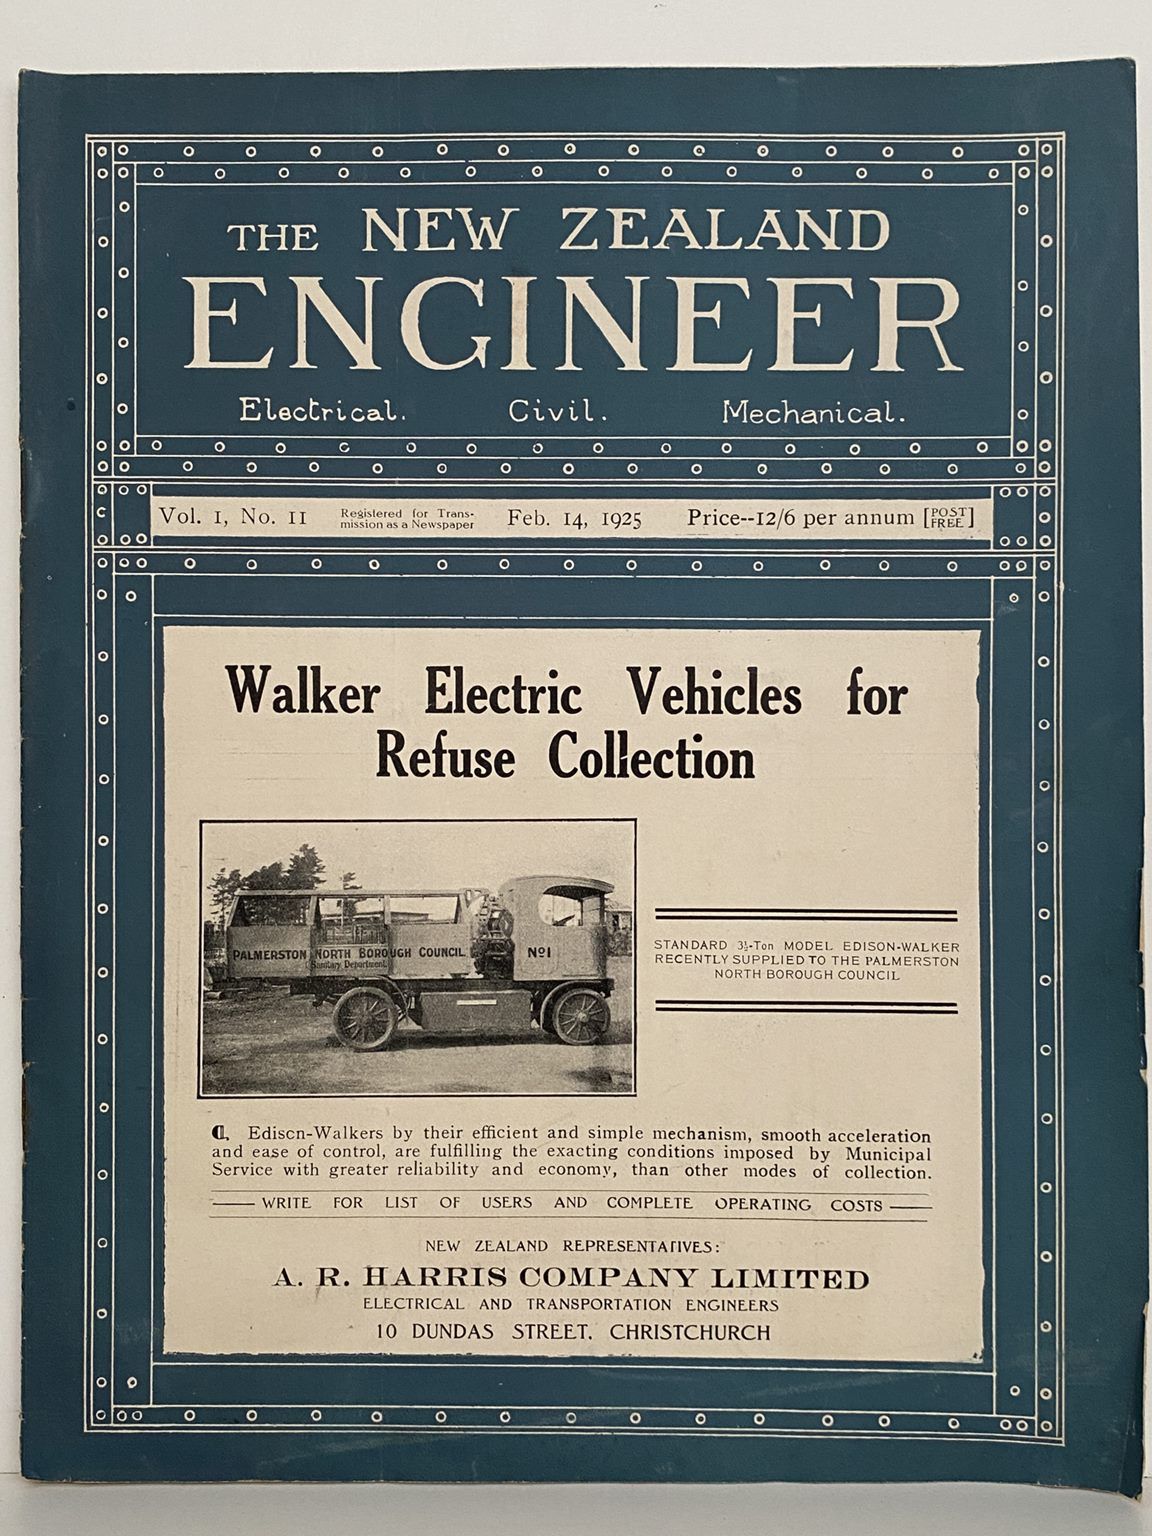 OLD MAGAZINE: The New Zealand Engineer Vol. 1, No. 11 - 14 February 1925